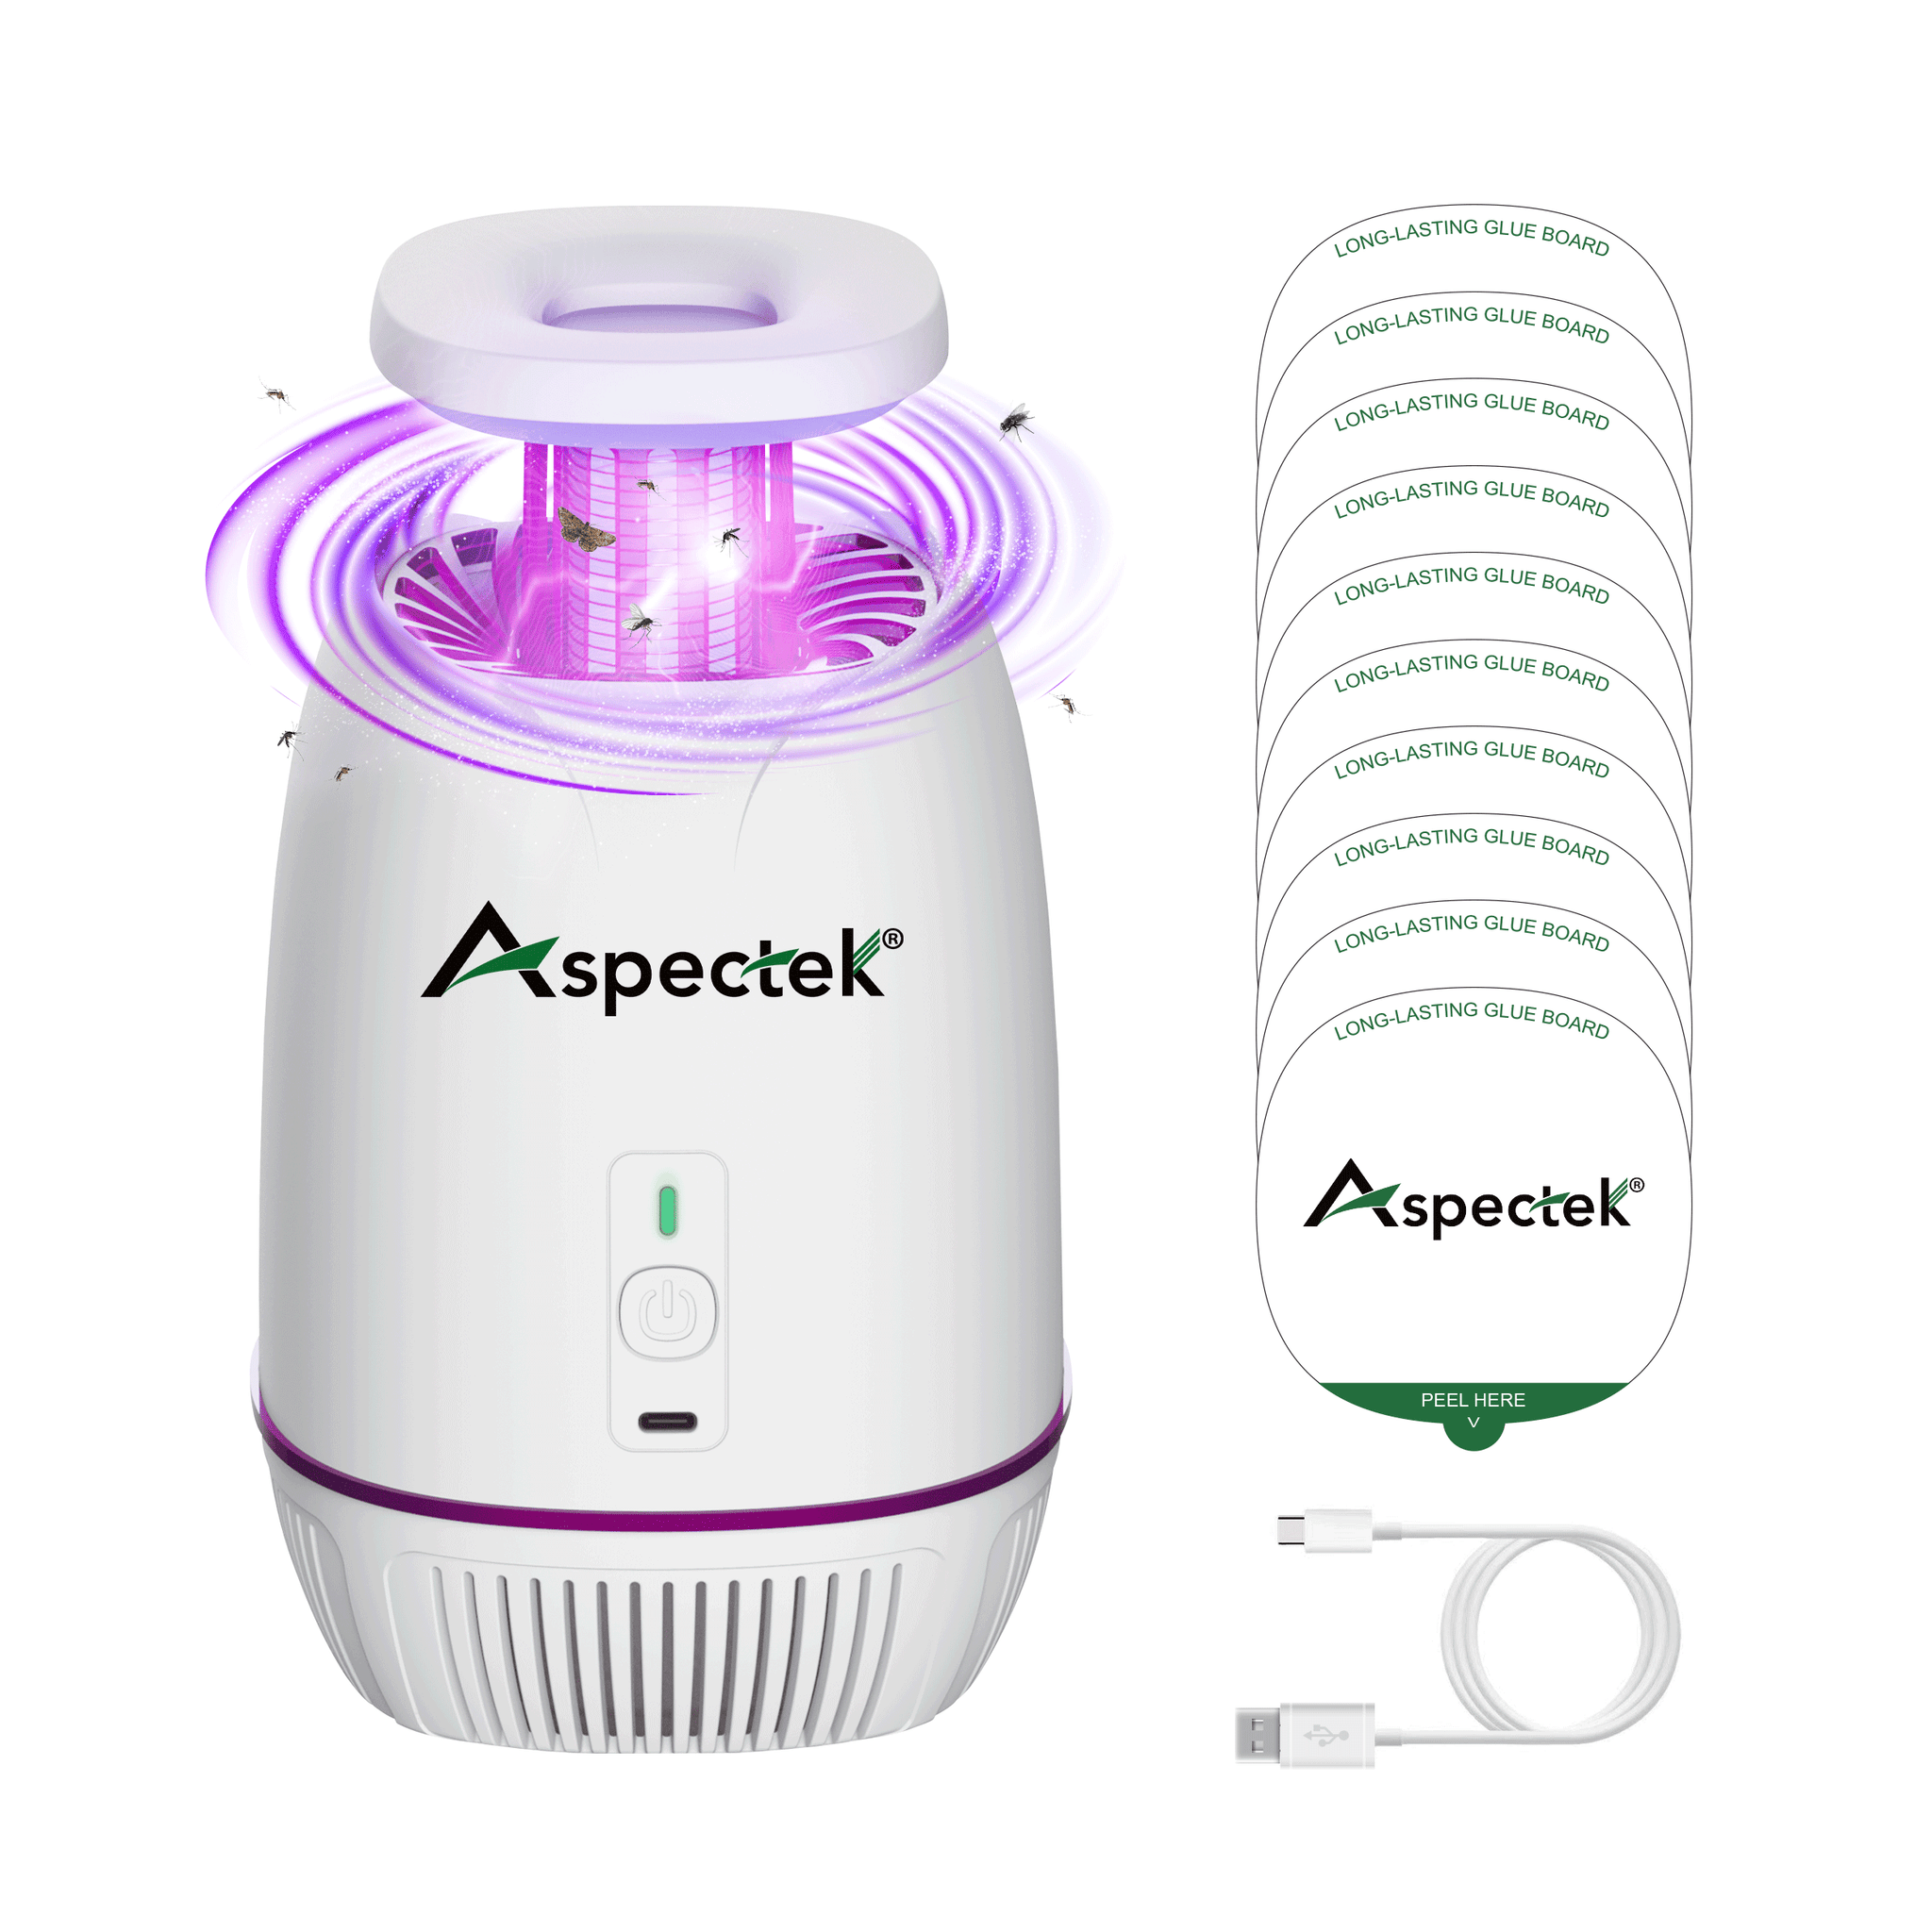 Indoor Bug Zapper, 4 in 1 Insect Fly Zapper with UV Light,Powerful Electric Grid,Strong Fan and 10PCS Sticky Pads